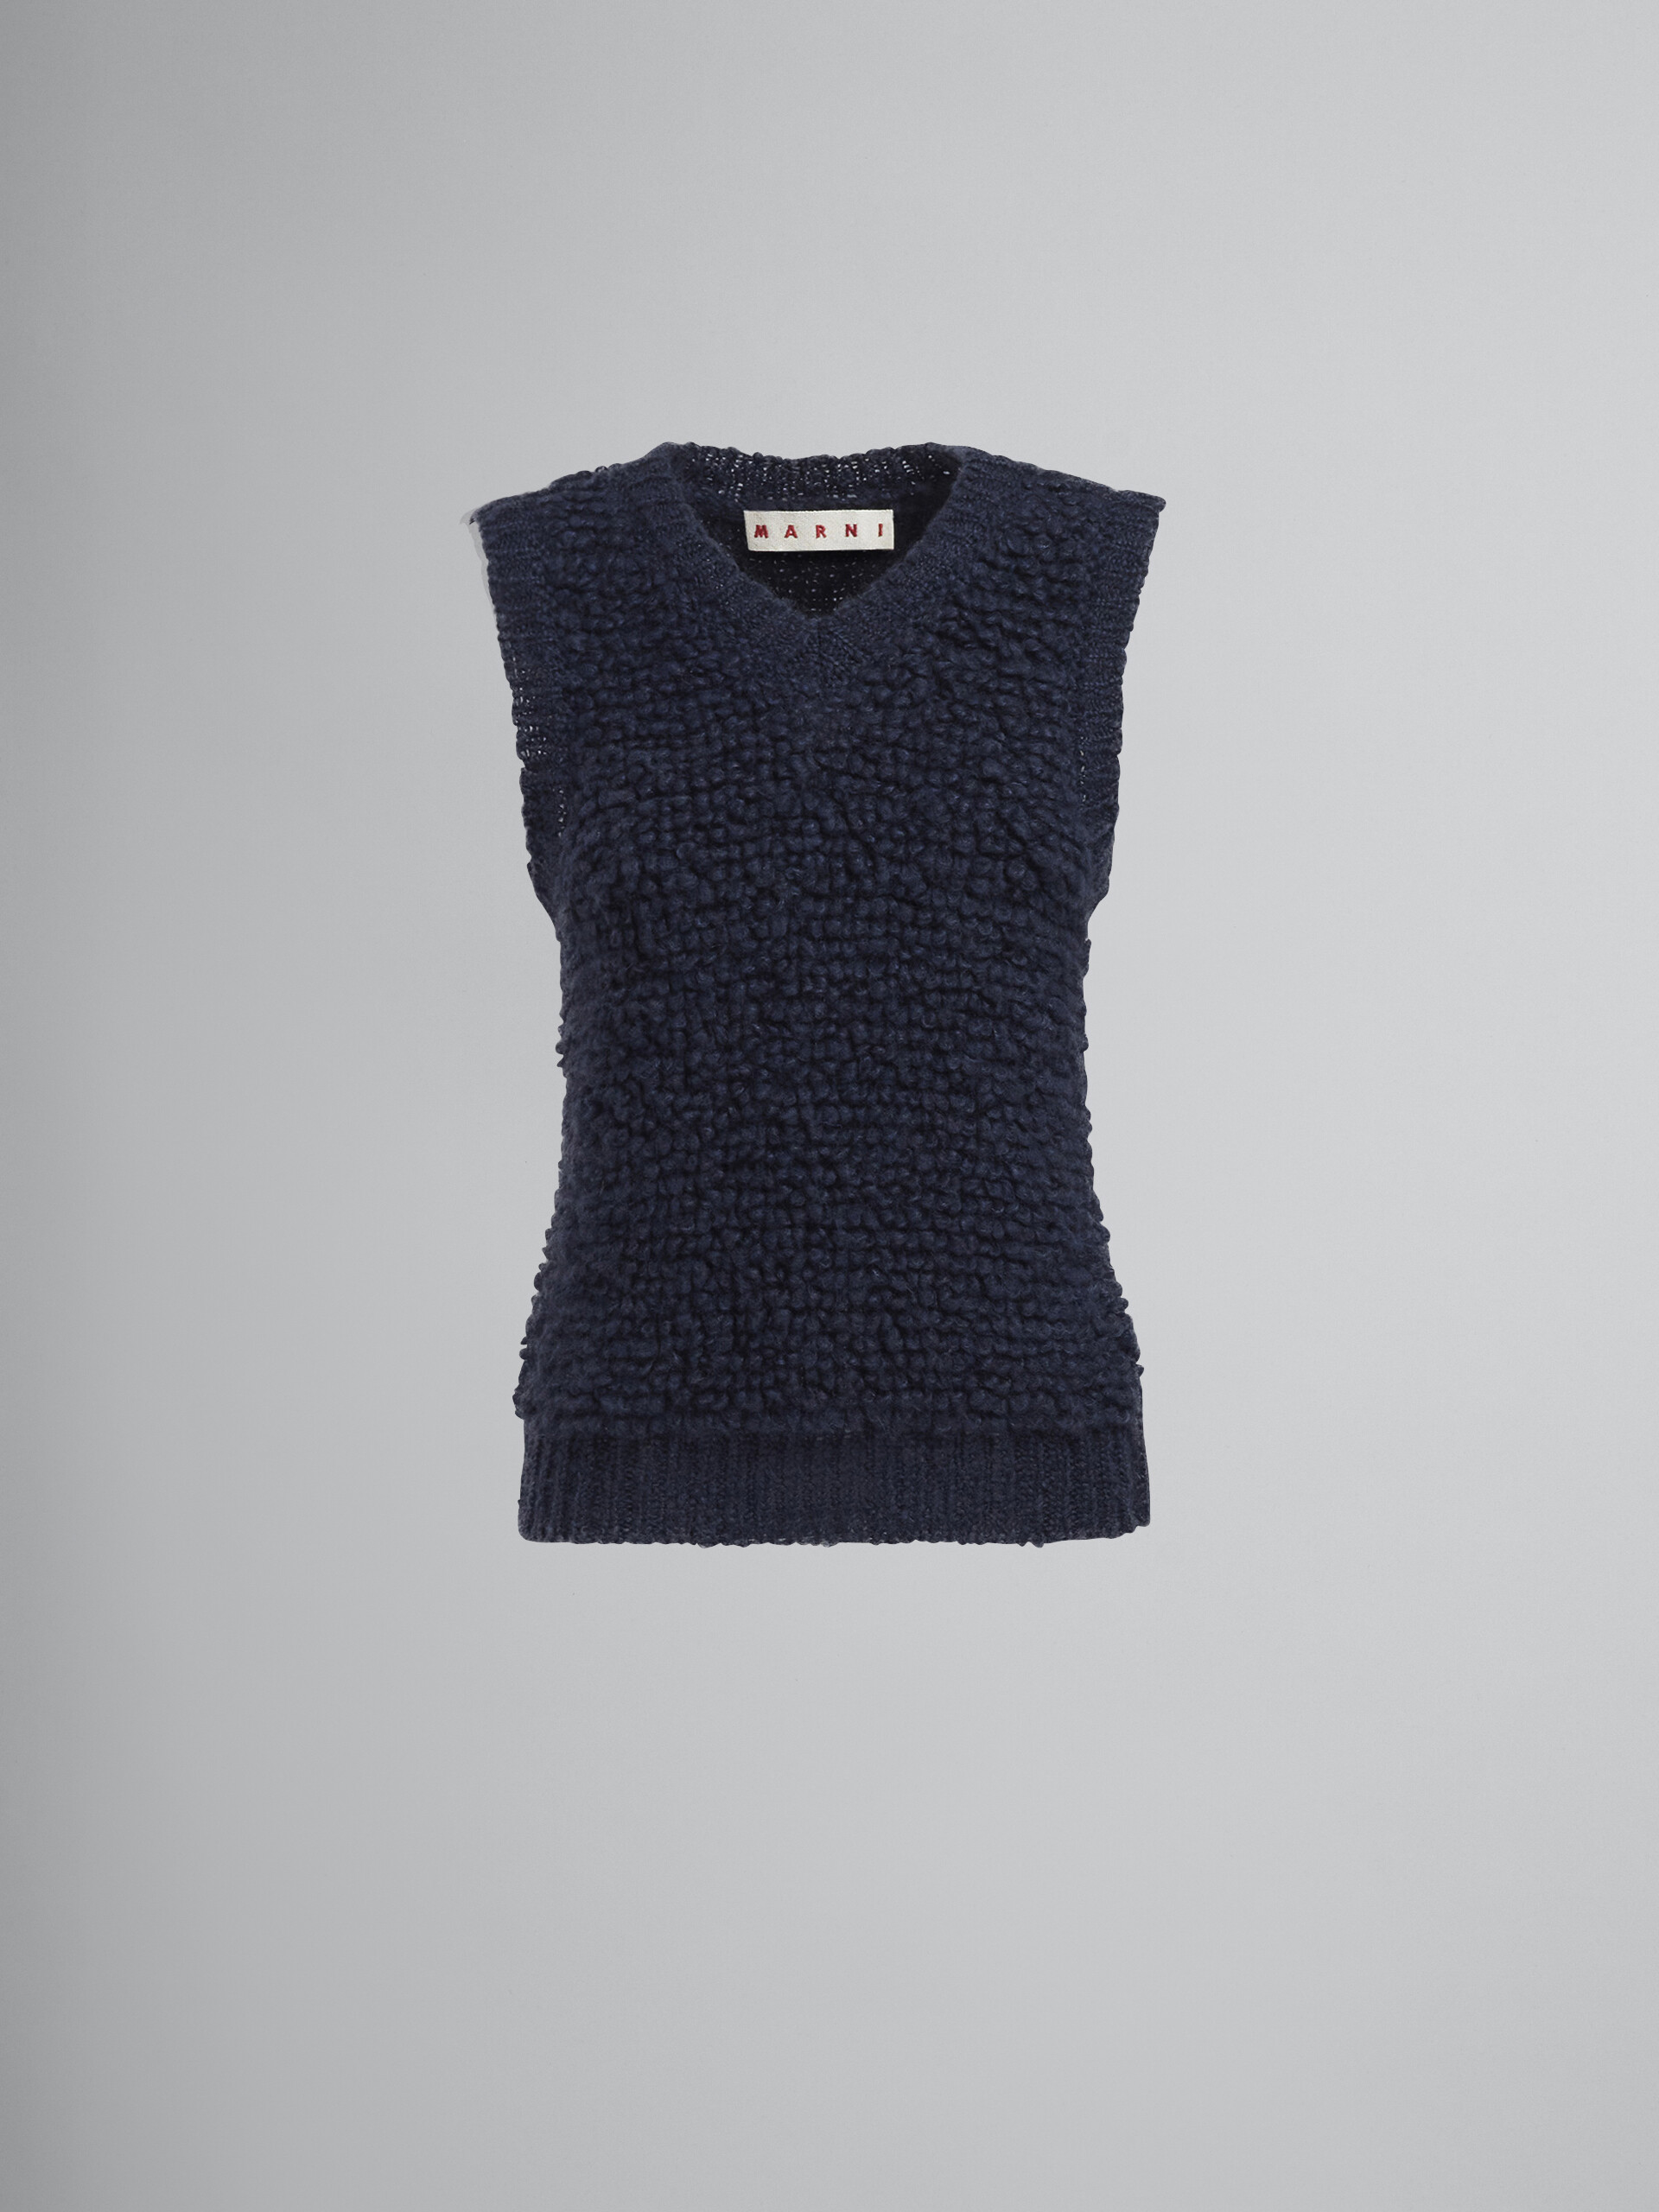 Mohair vest - Pullovers - Image 1